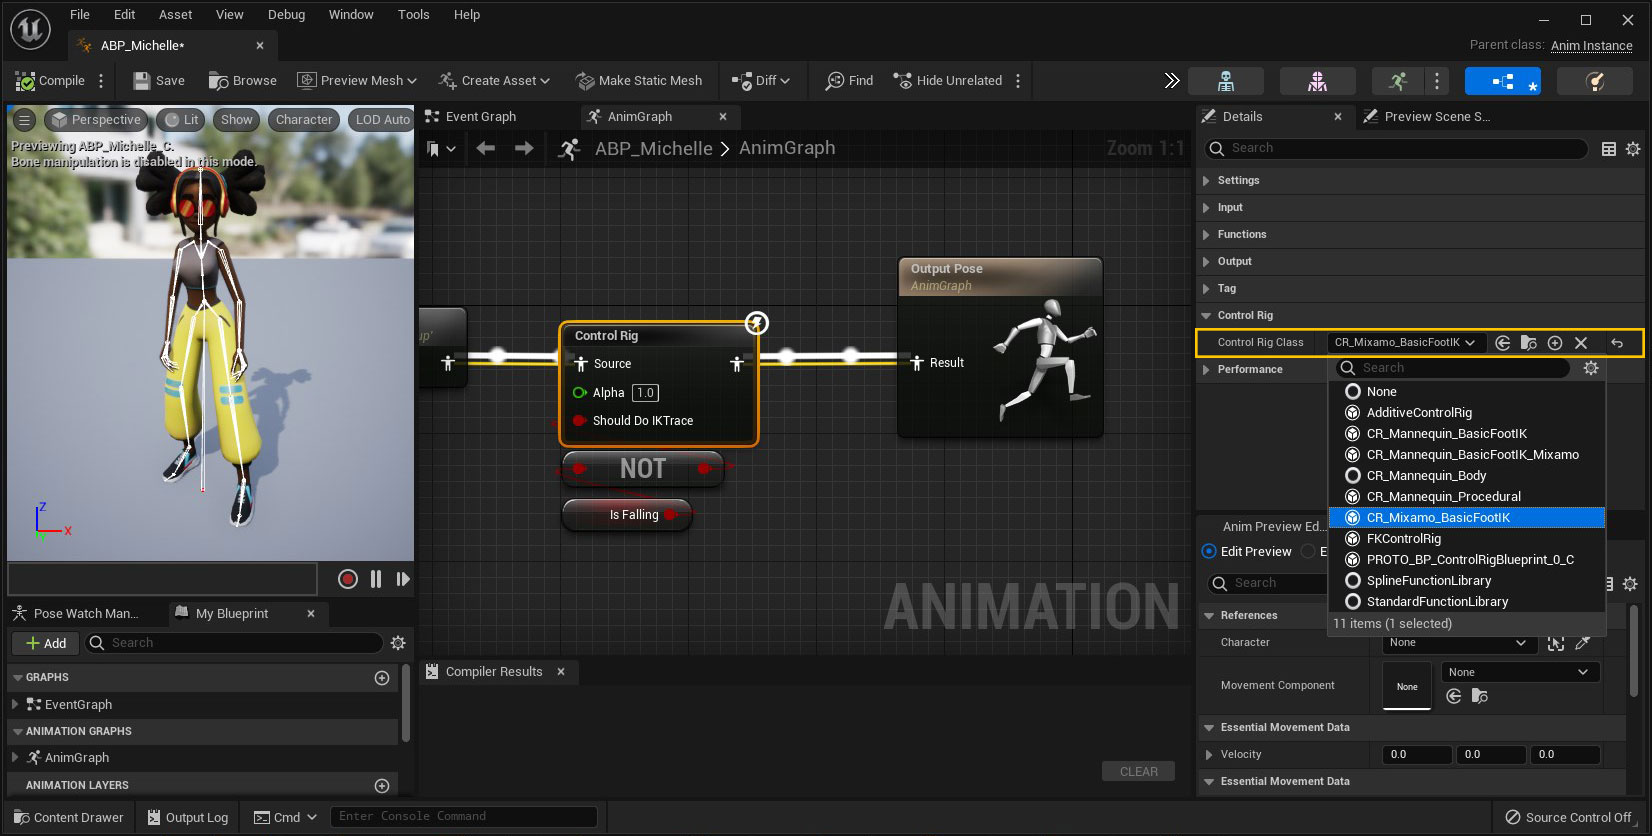 Updating the Control Rig setting in the Animation Blueprint